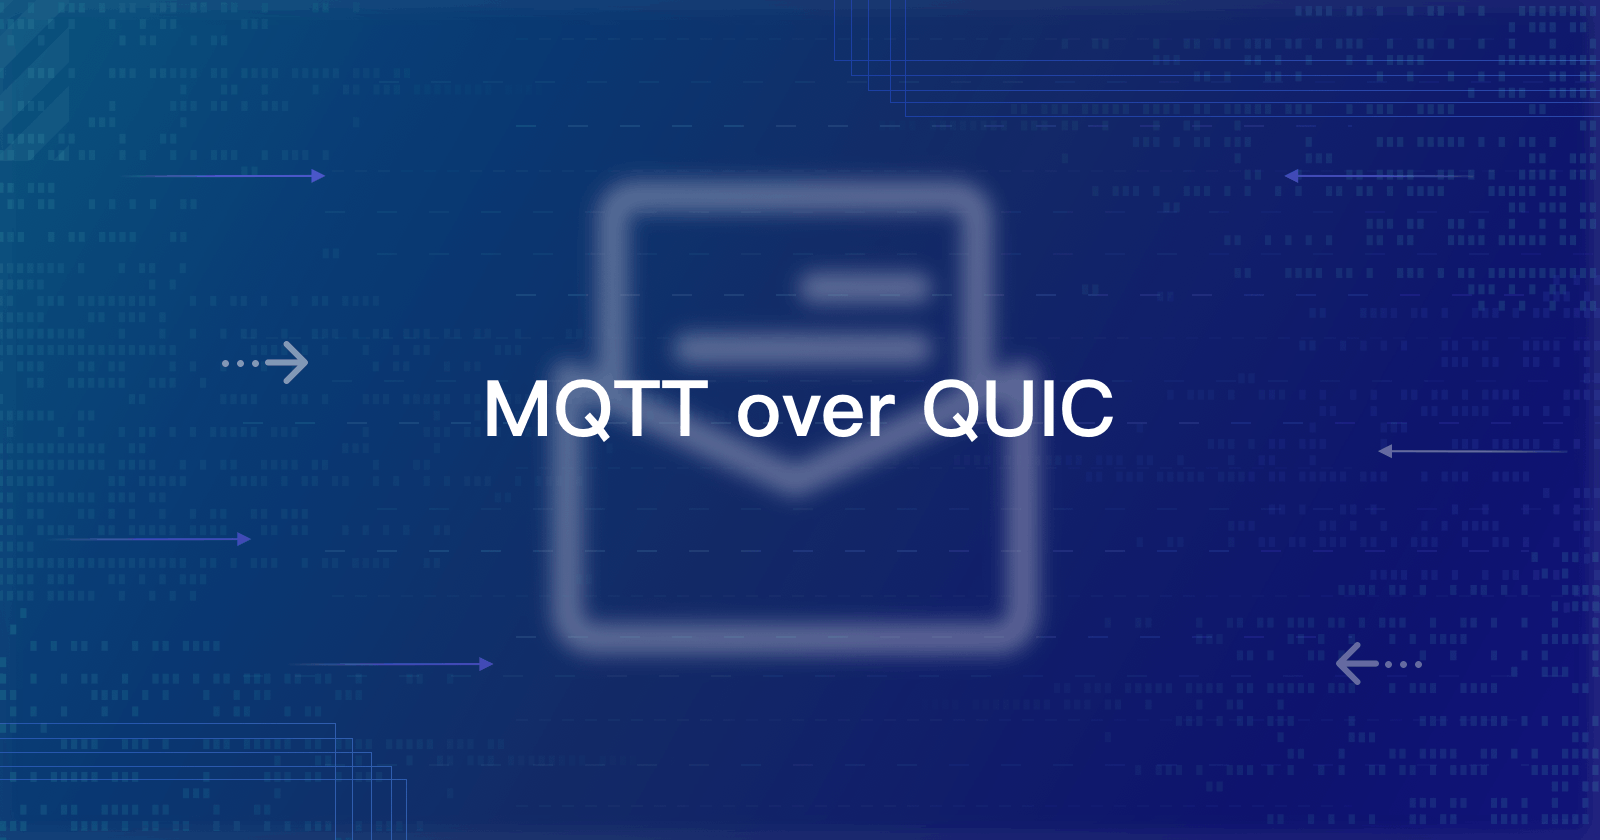 Get Started with MQTT over QUIC: A Quick Guide for The Next-generation IoT Standard Protocol